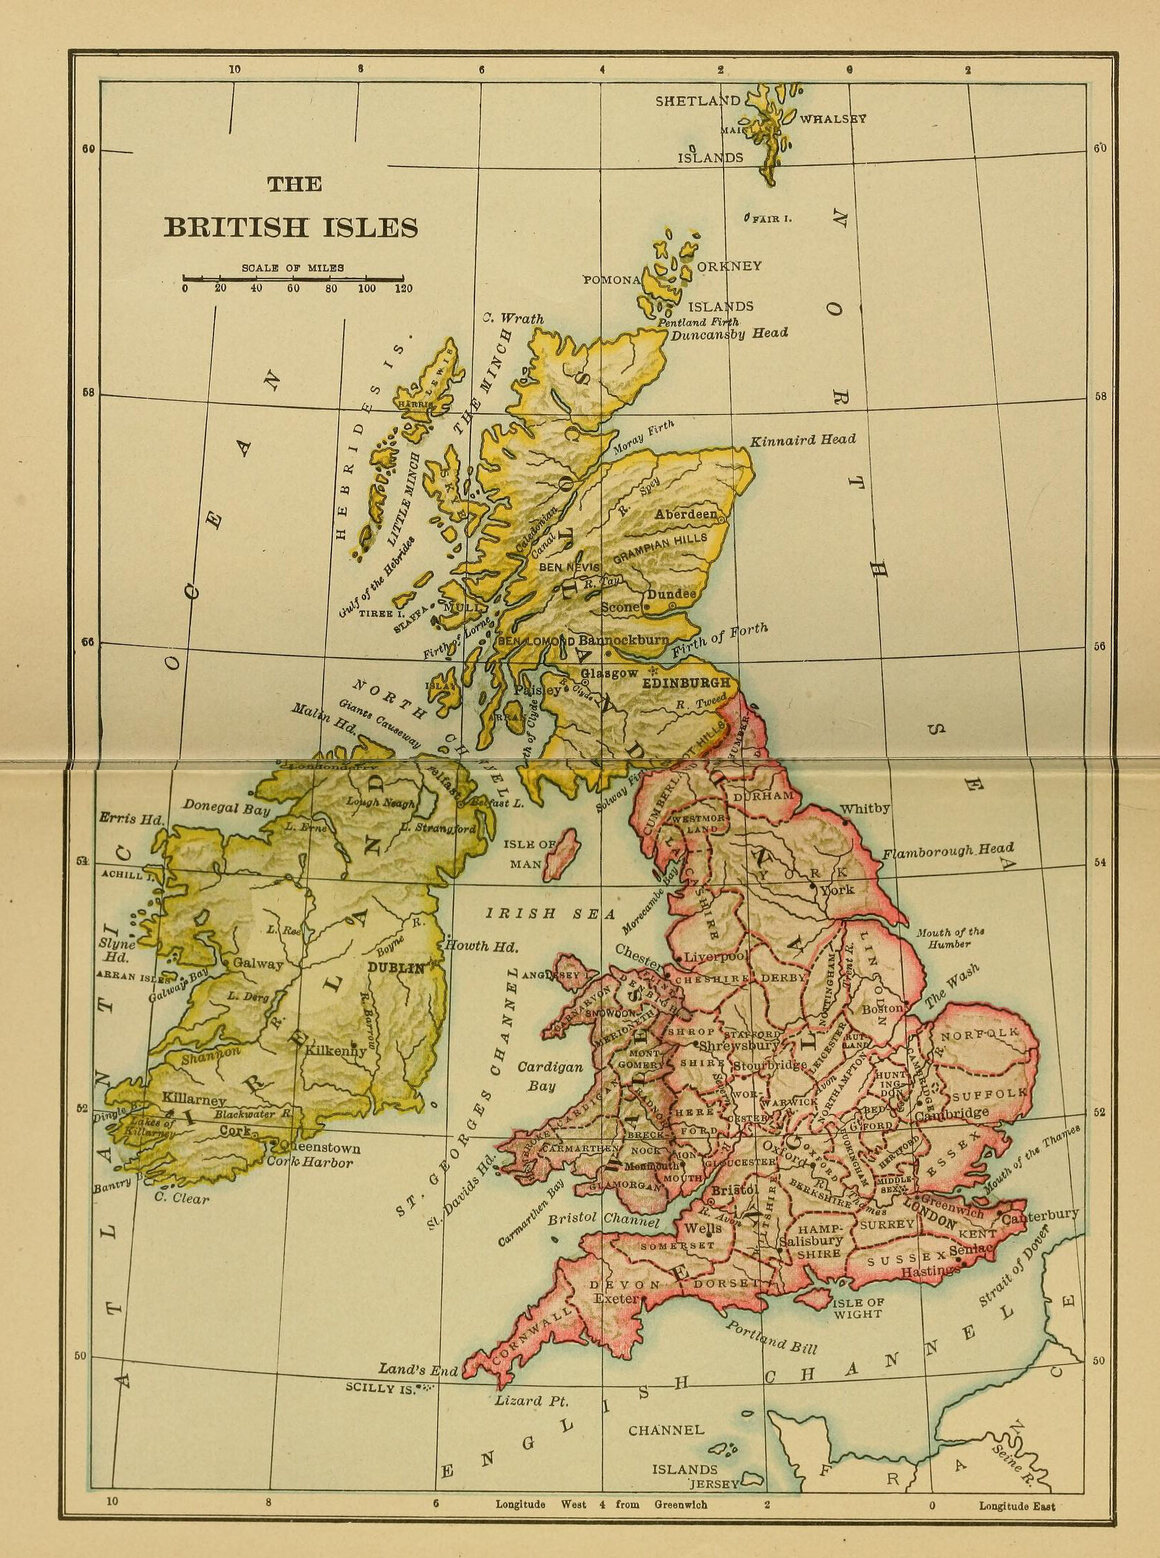 A 19th-century map of the British isles.